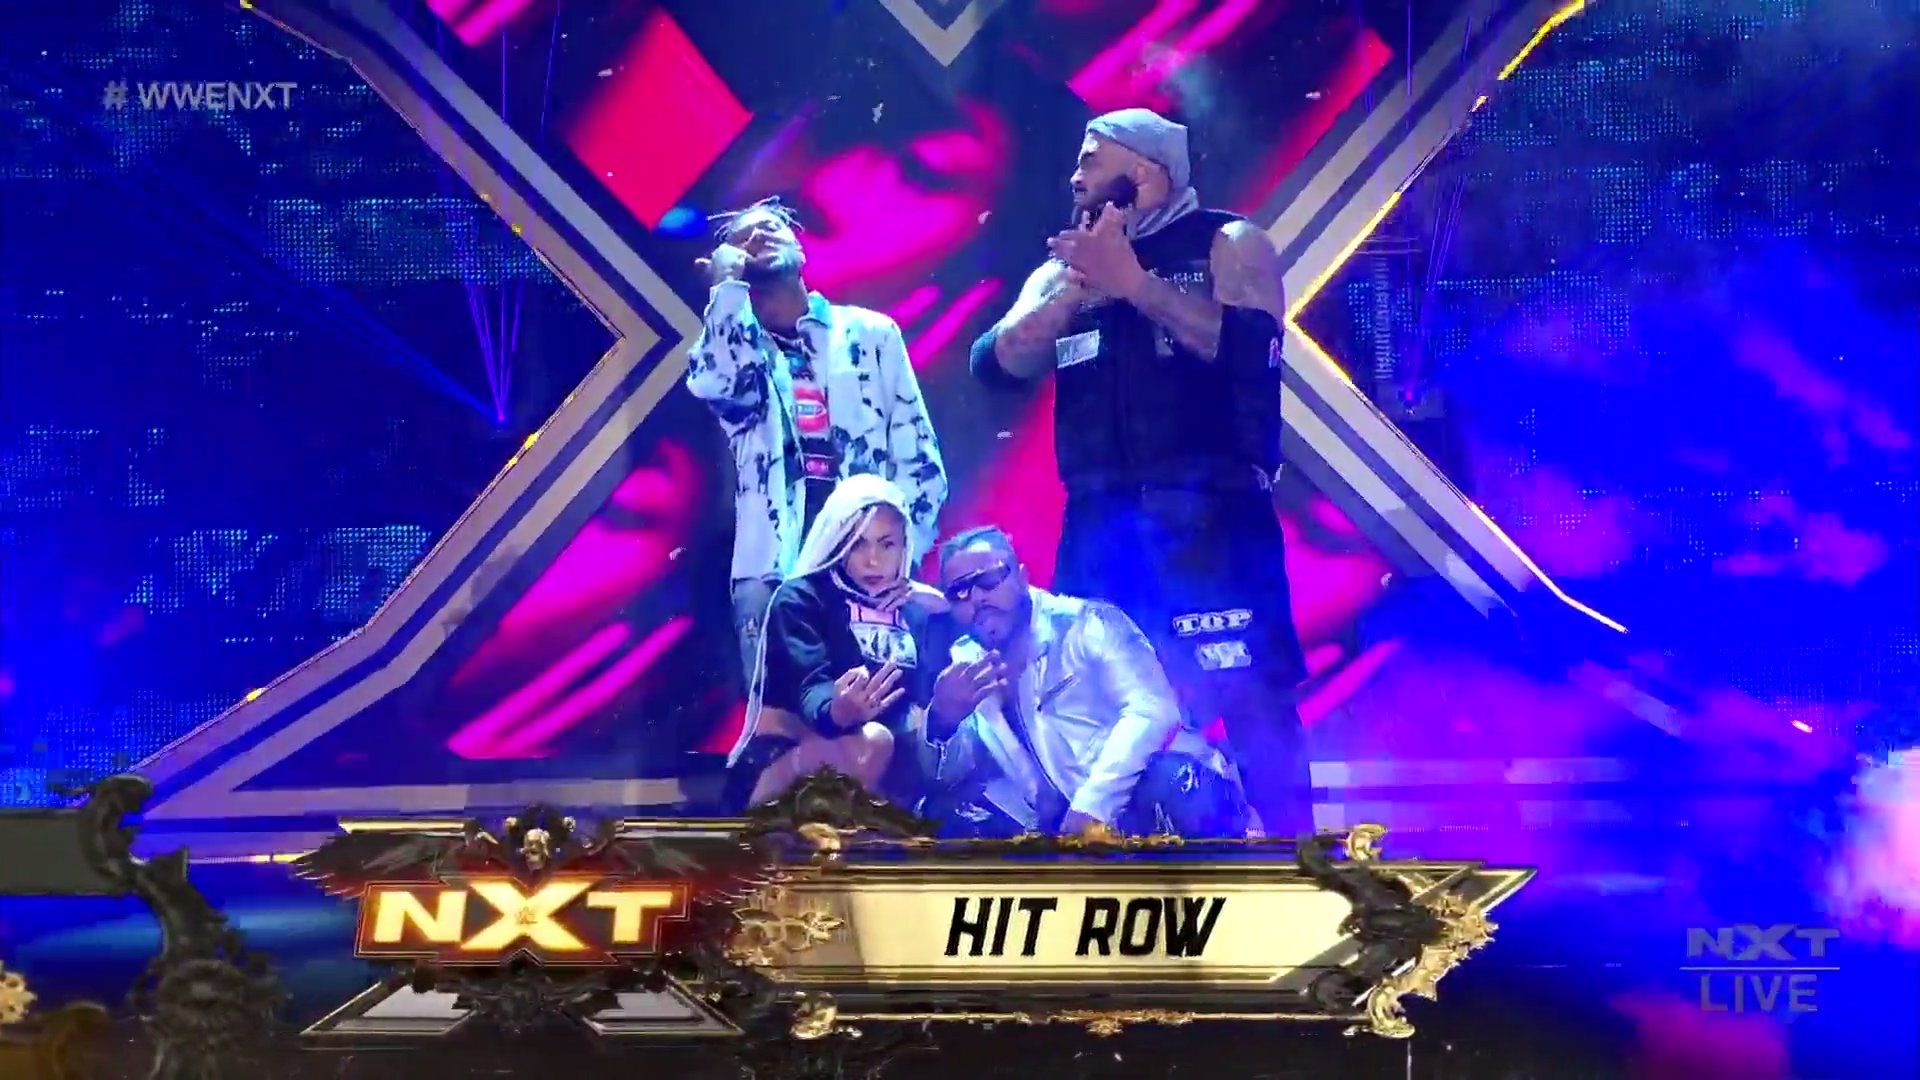 the four member of Hit Row make their way to the ring on NXT